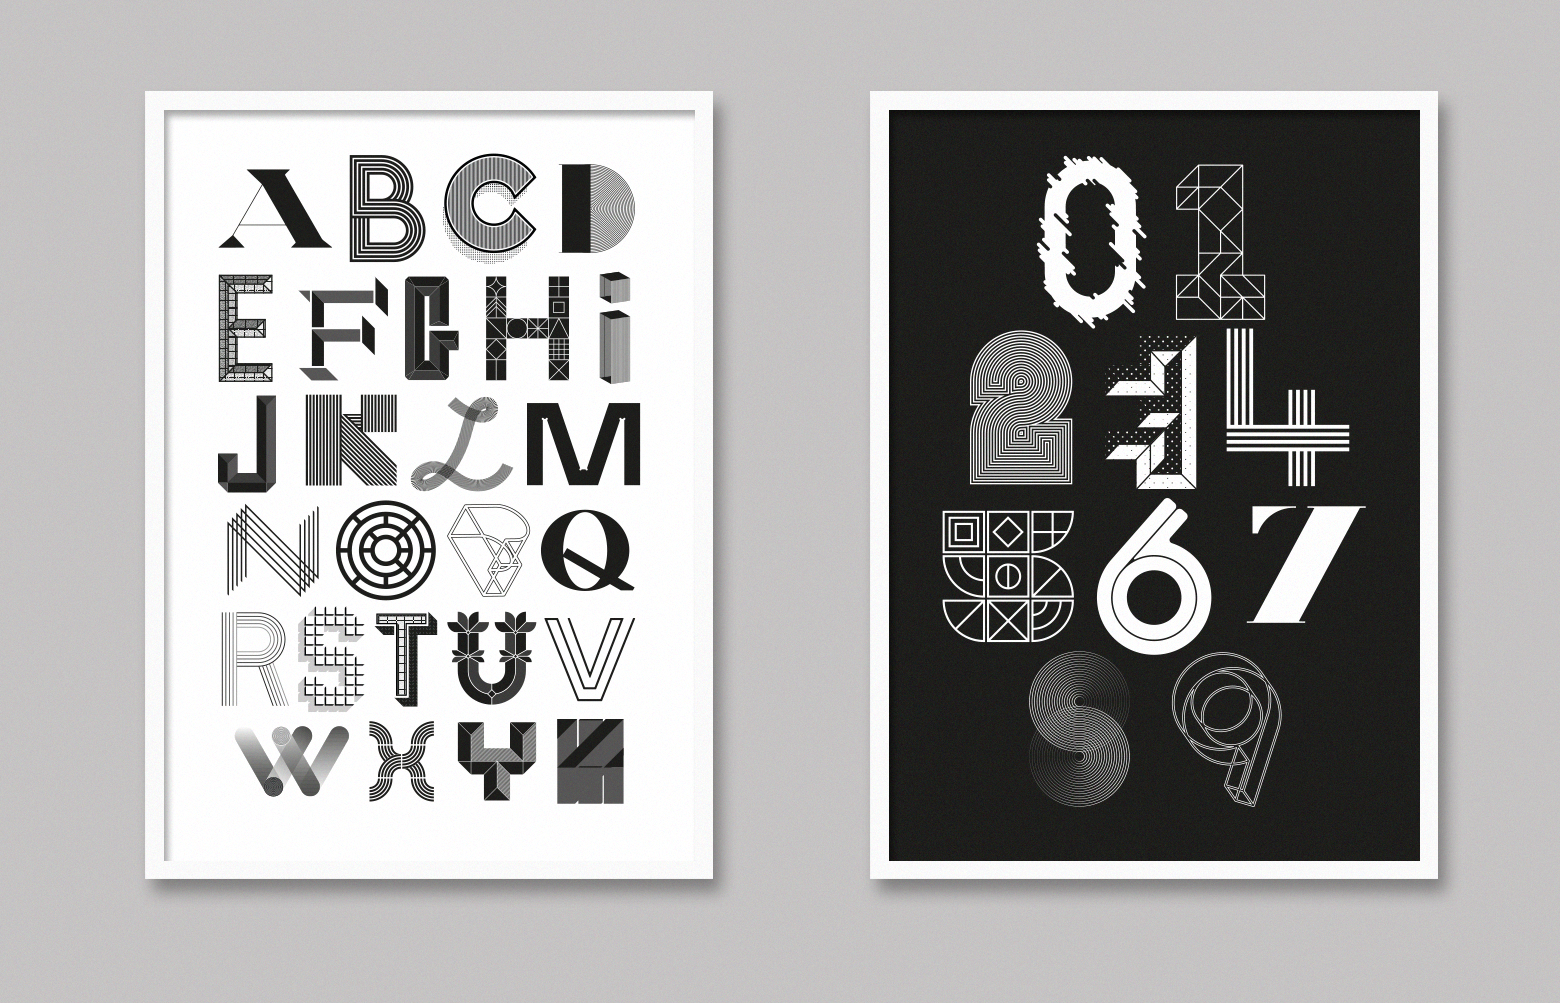 Alphabet and numerals prints framed up by A.N.D. Studio